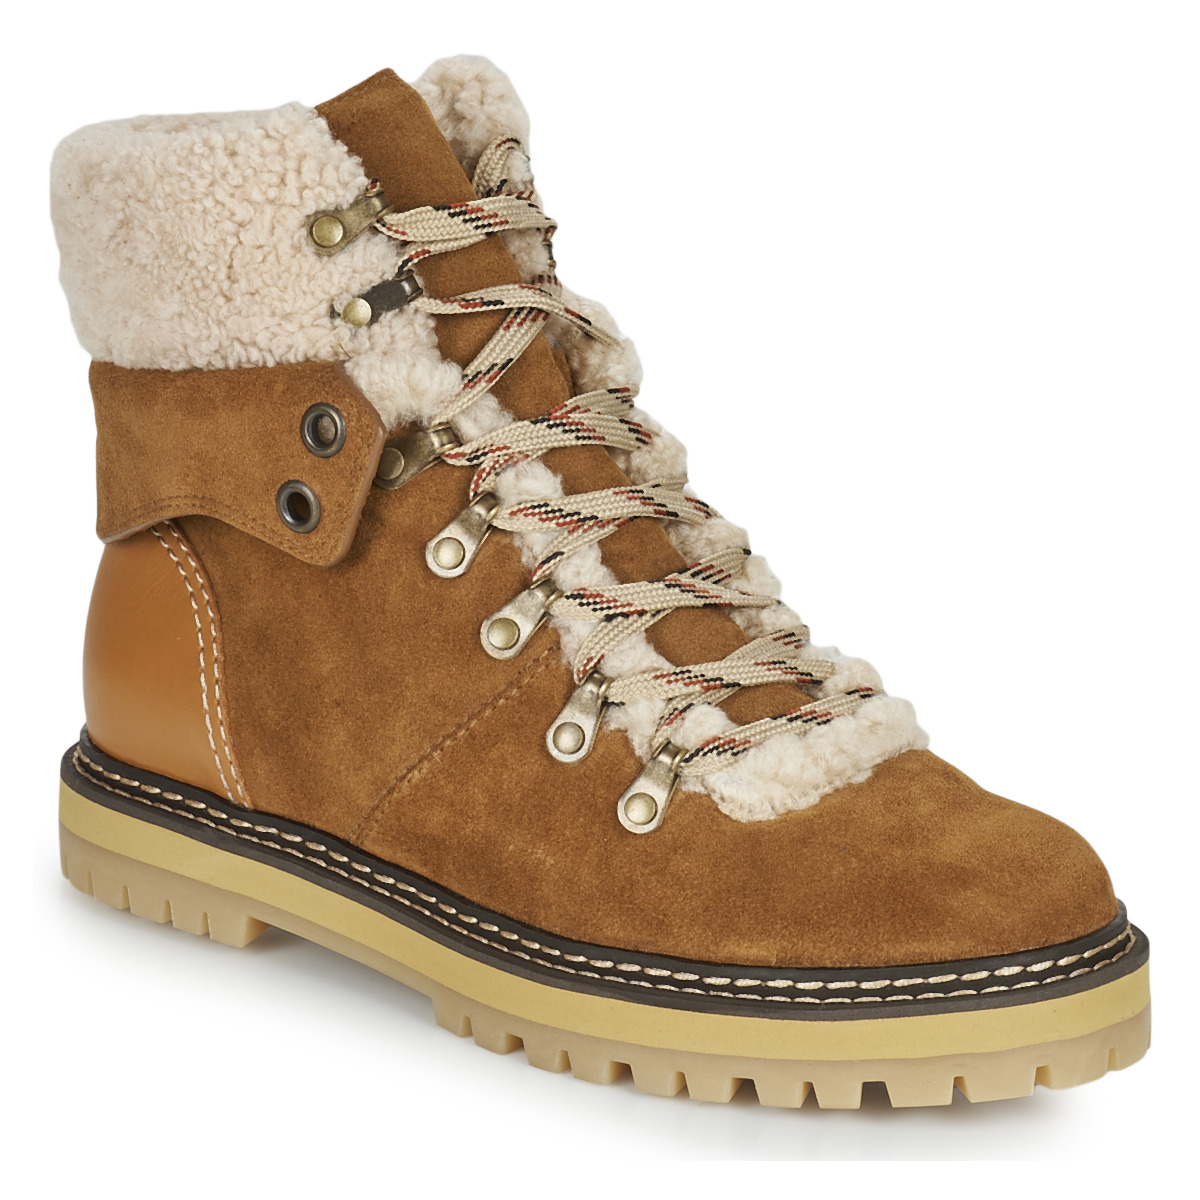 Chaussures Femme Bottes de neige See by Chloé EILEEN 